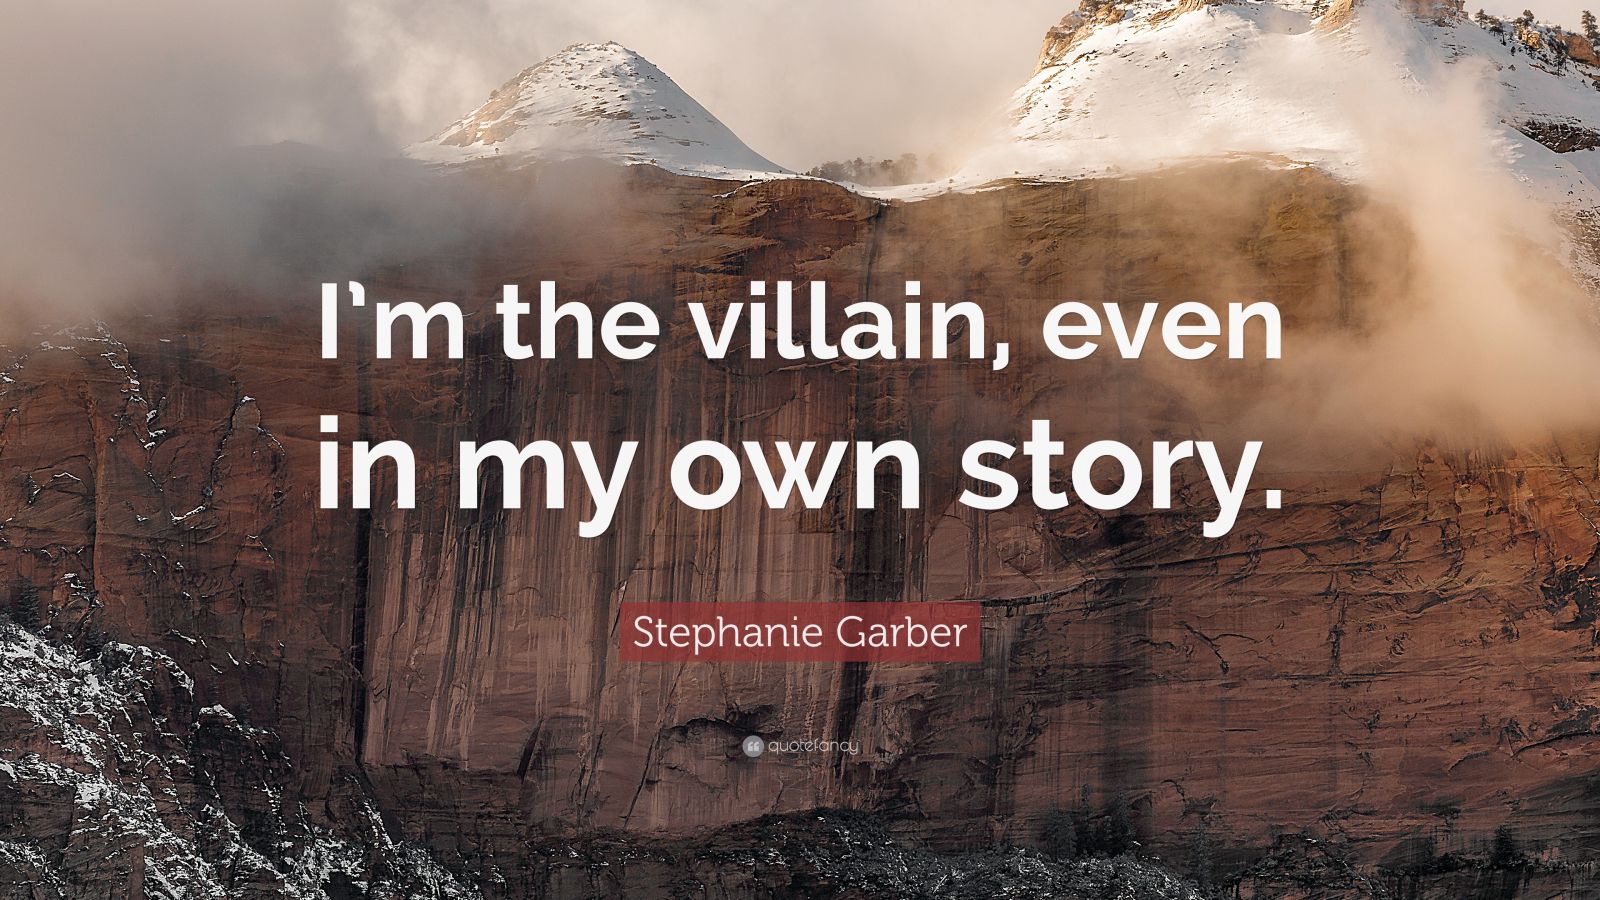 Stephanie Garber Quote: “I'm the villain, even in my own story.”